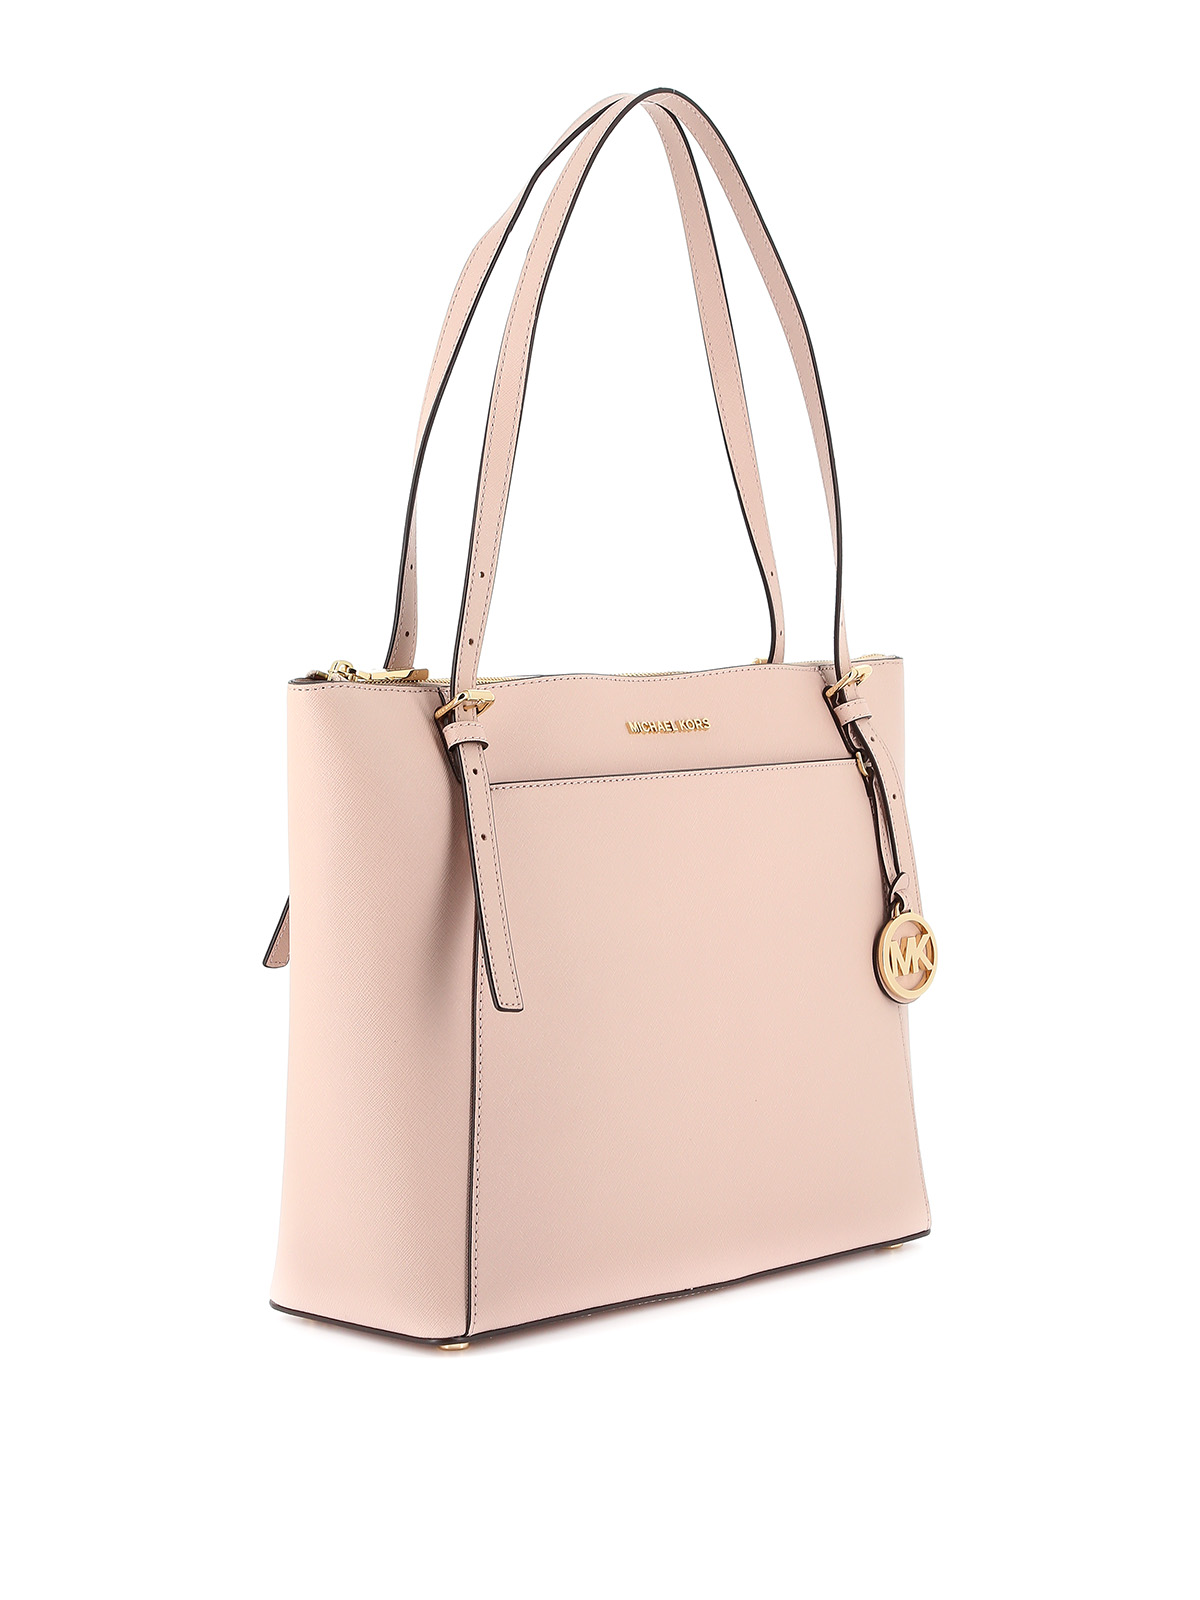 Michael Kors Voyager Large Leather Tote Bag